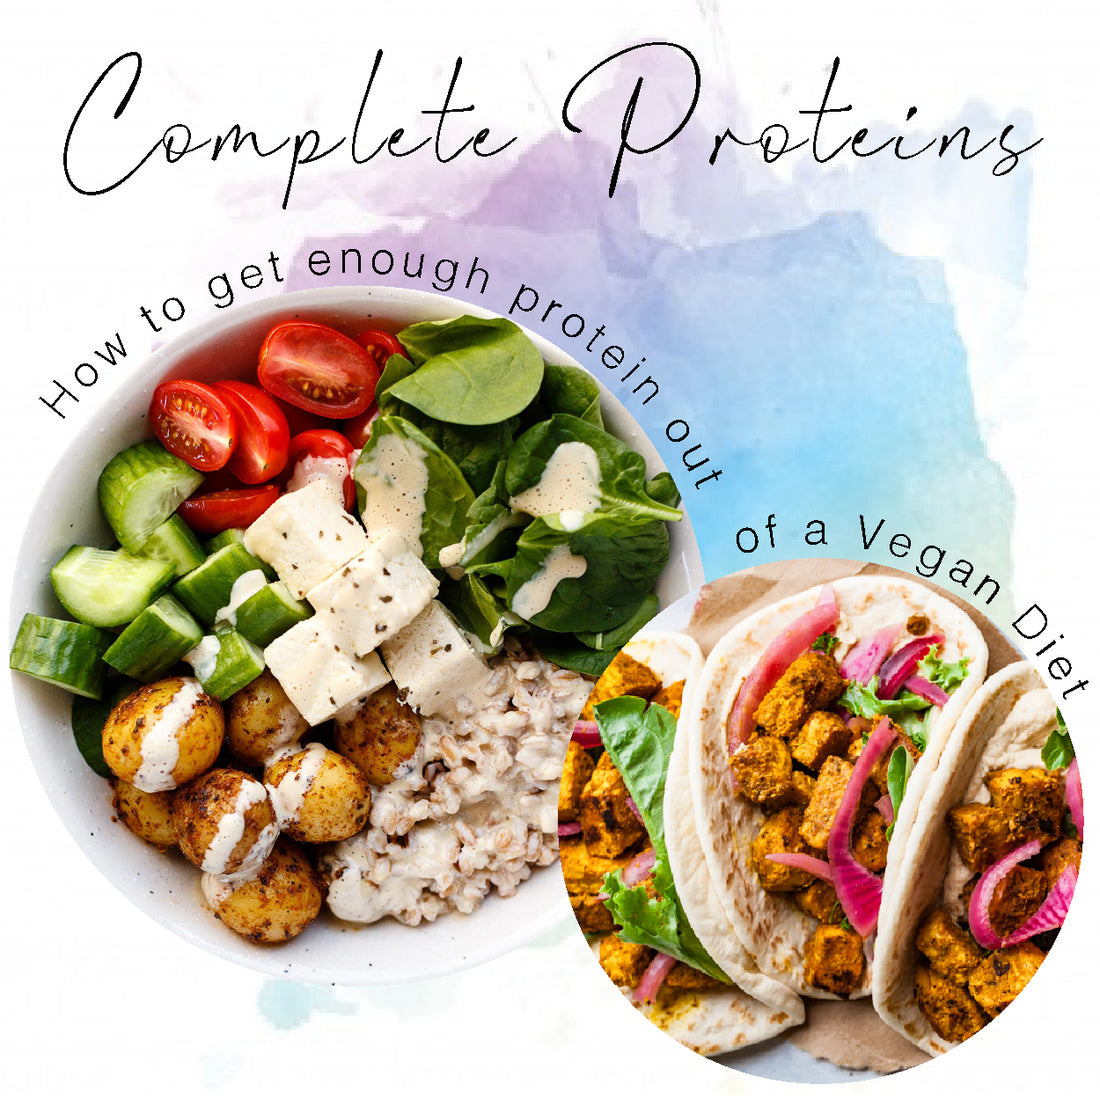 Complete Proteins - How To Get Enough Protein Out Of A Vegan Diet